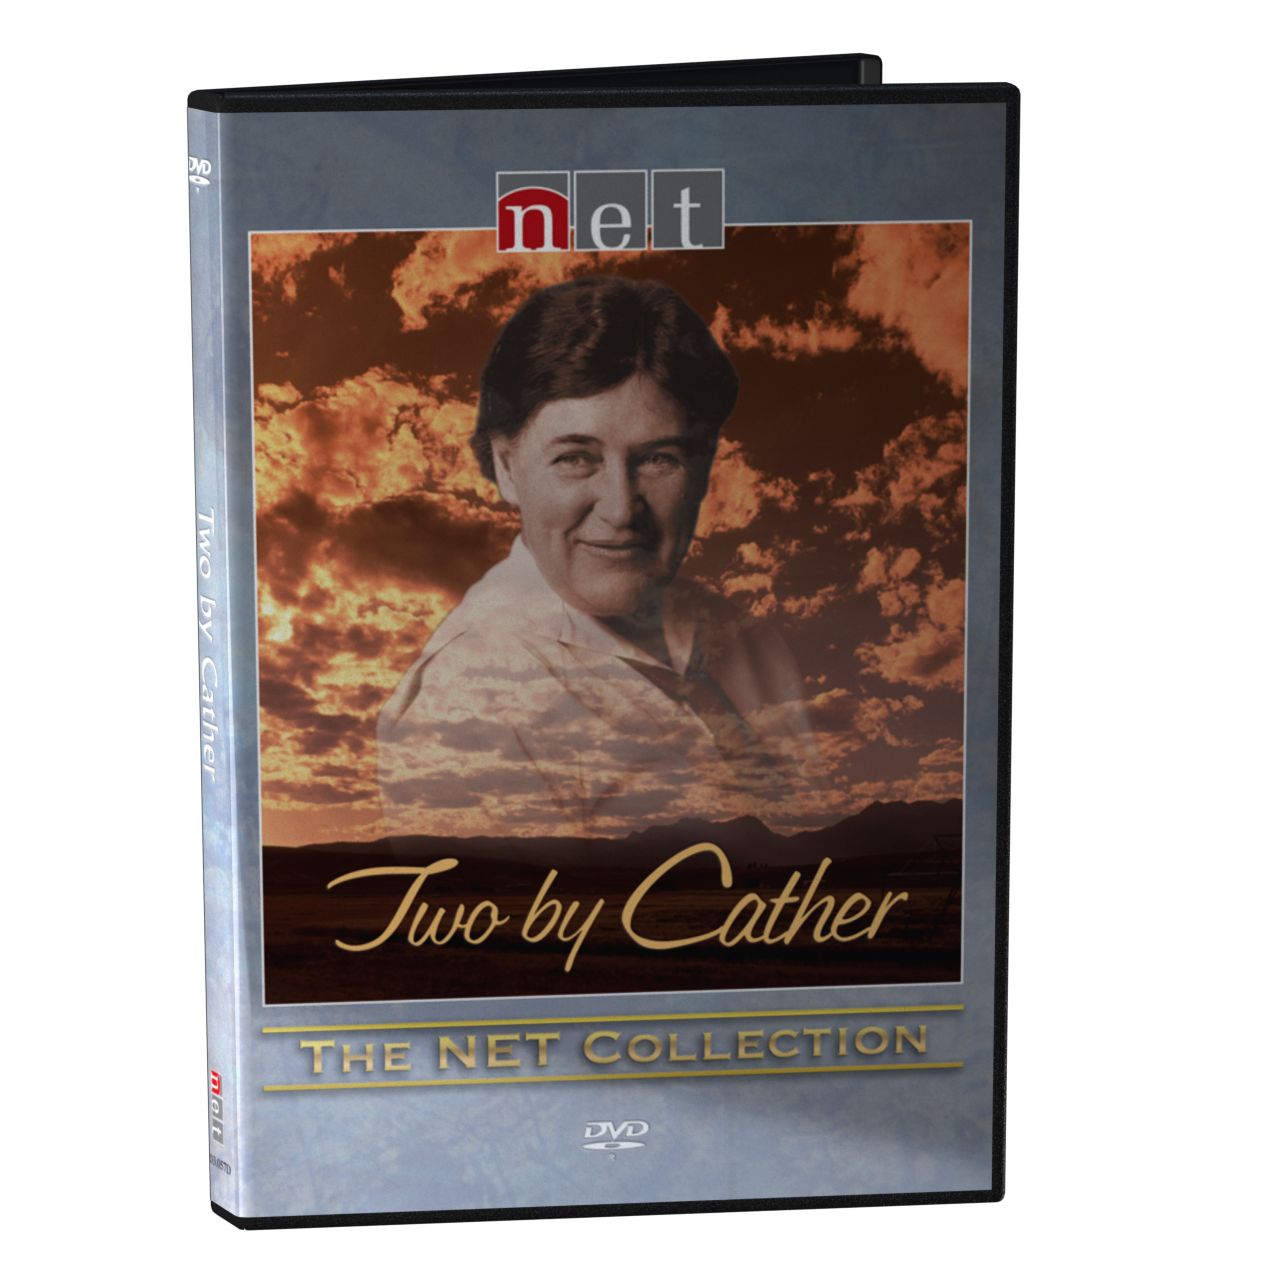 Two by Cather